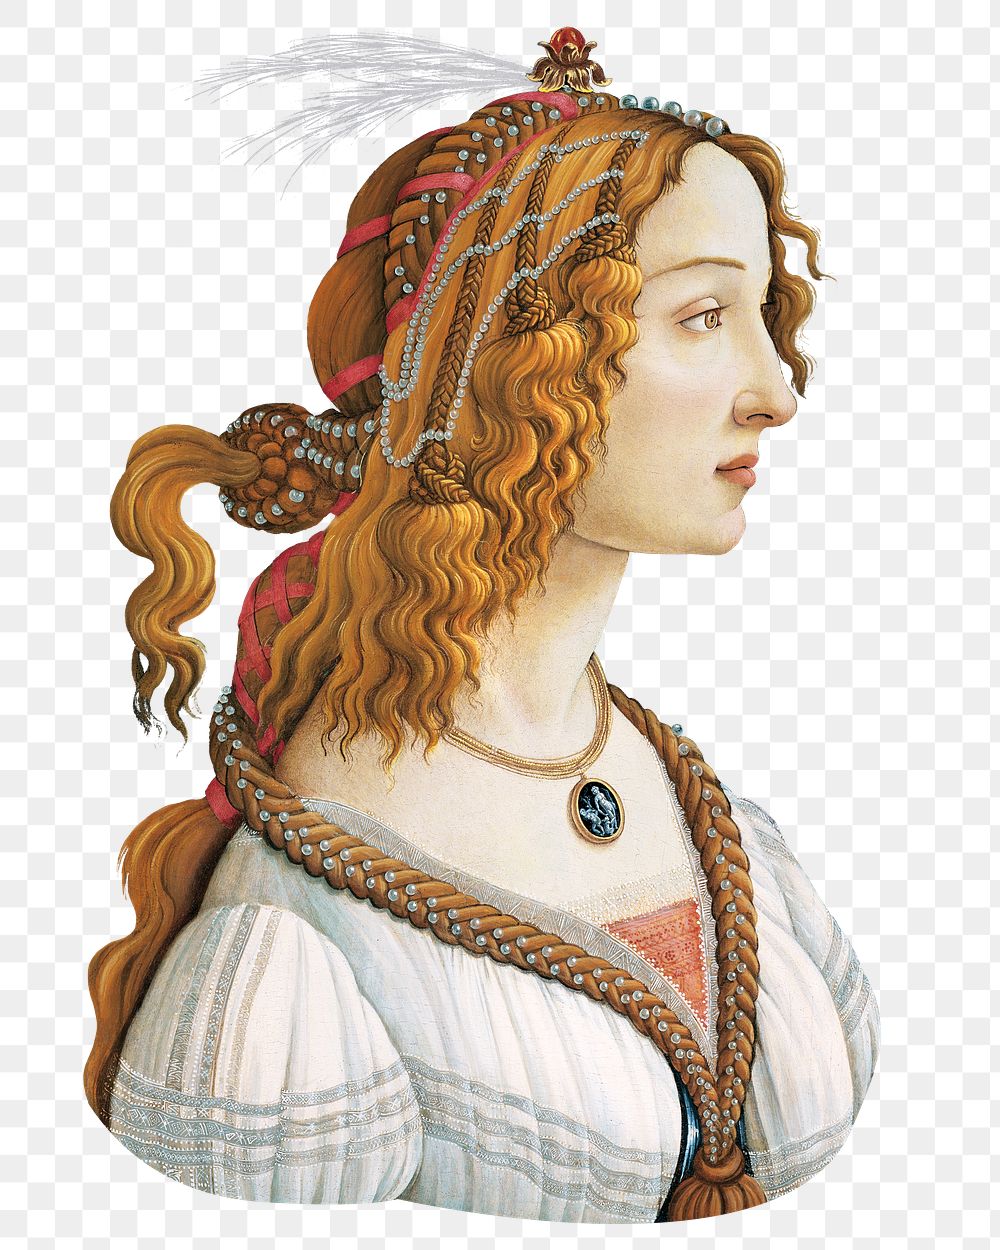 Aesthetic Sandro Botticelli's woman portrait png on transparent background.  Remastered by rawpixel